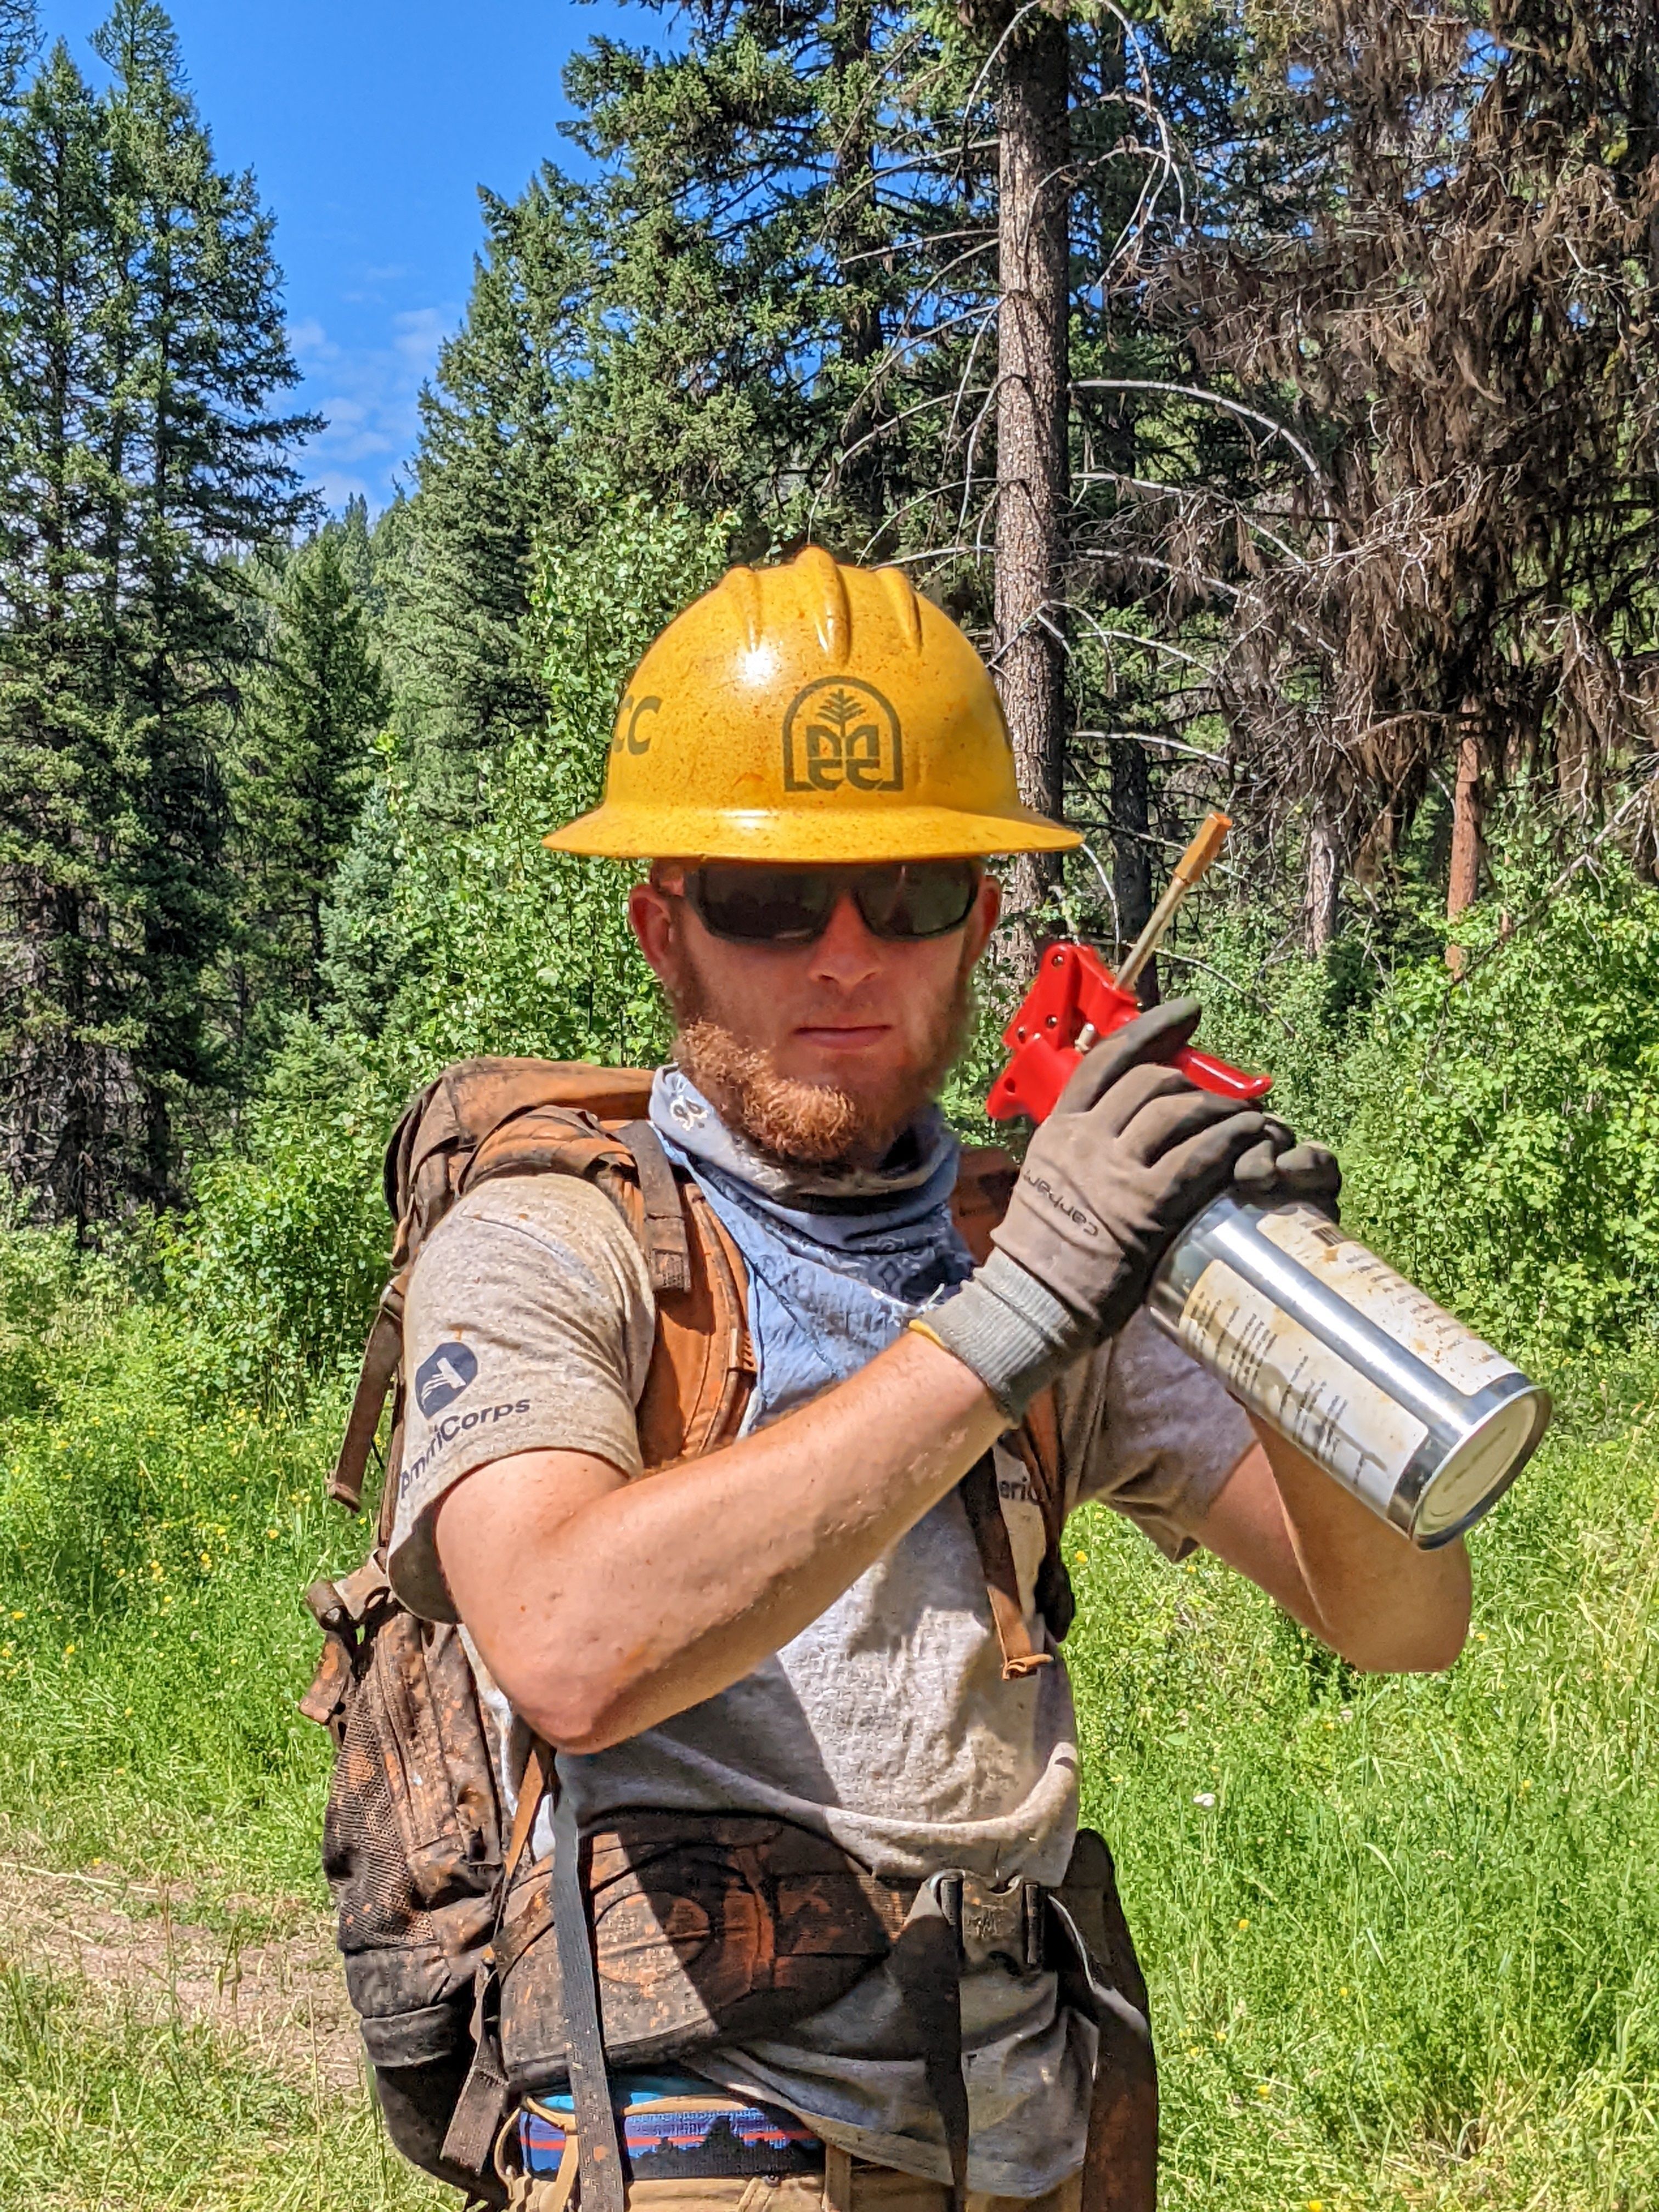 A crew member holds a spray paint can up to their face with a serious expression, as they get ready to mark some trees!